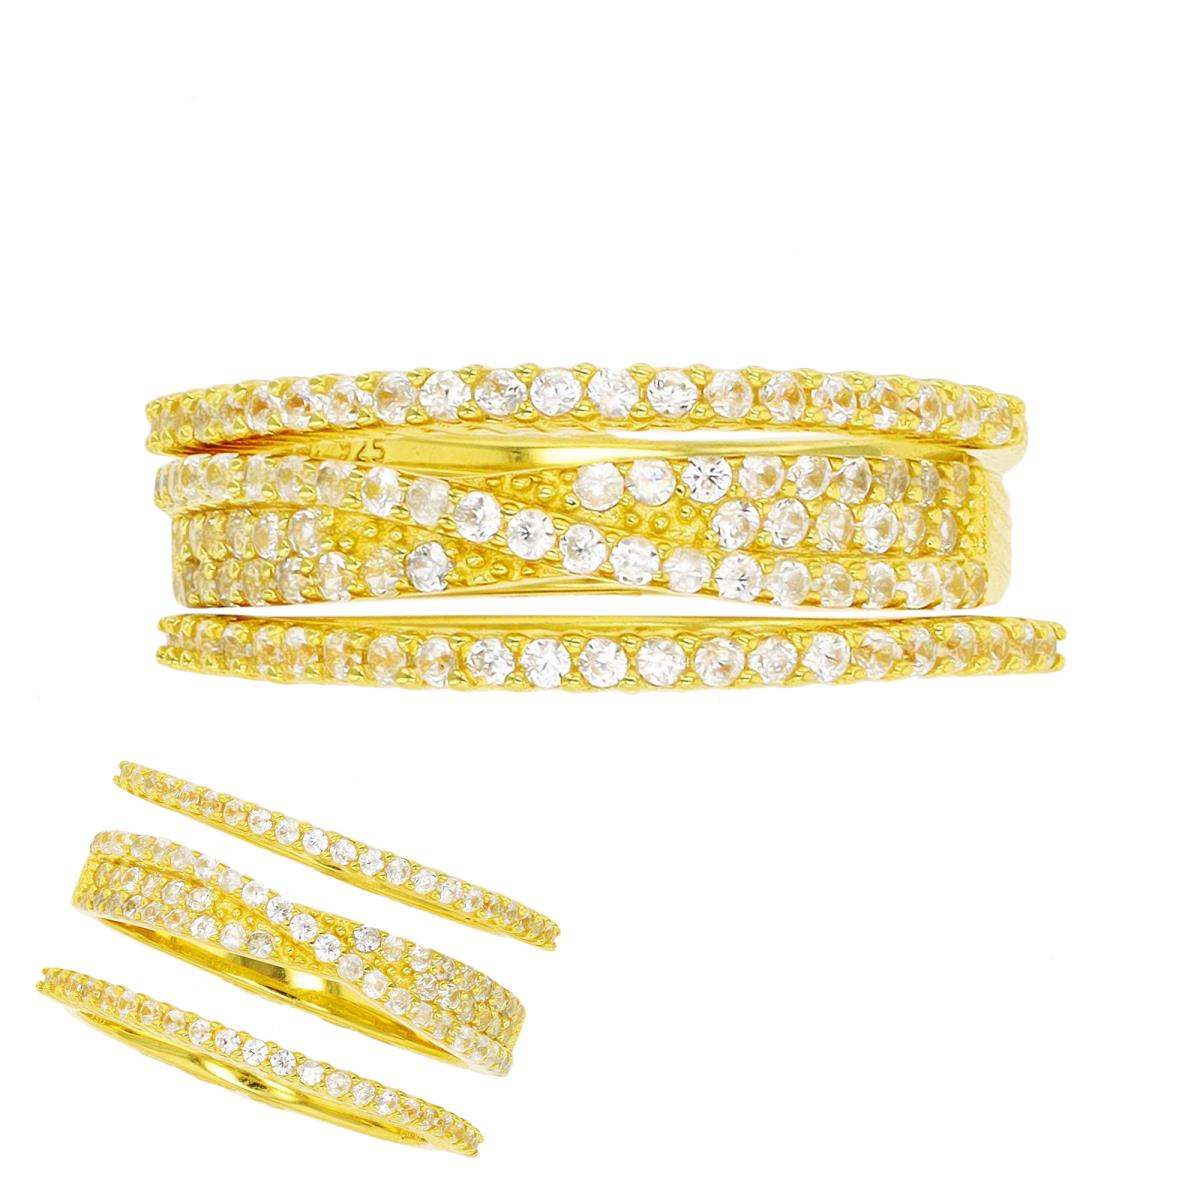 Sterling Silver Yellow Thin Band & Overlapped Stack Set of 3 Rings